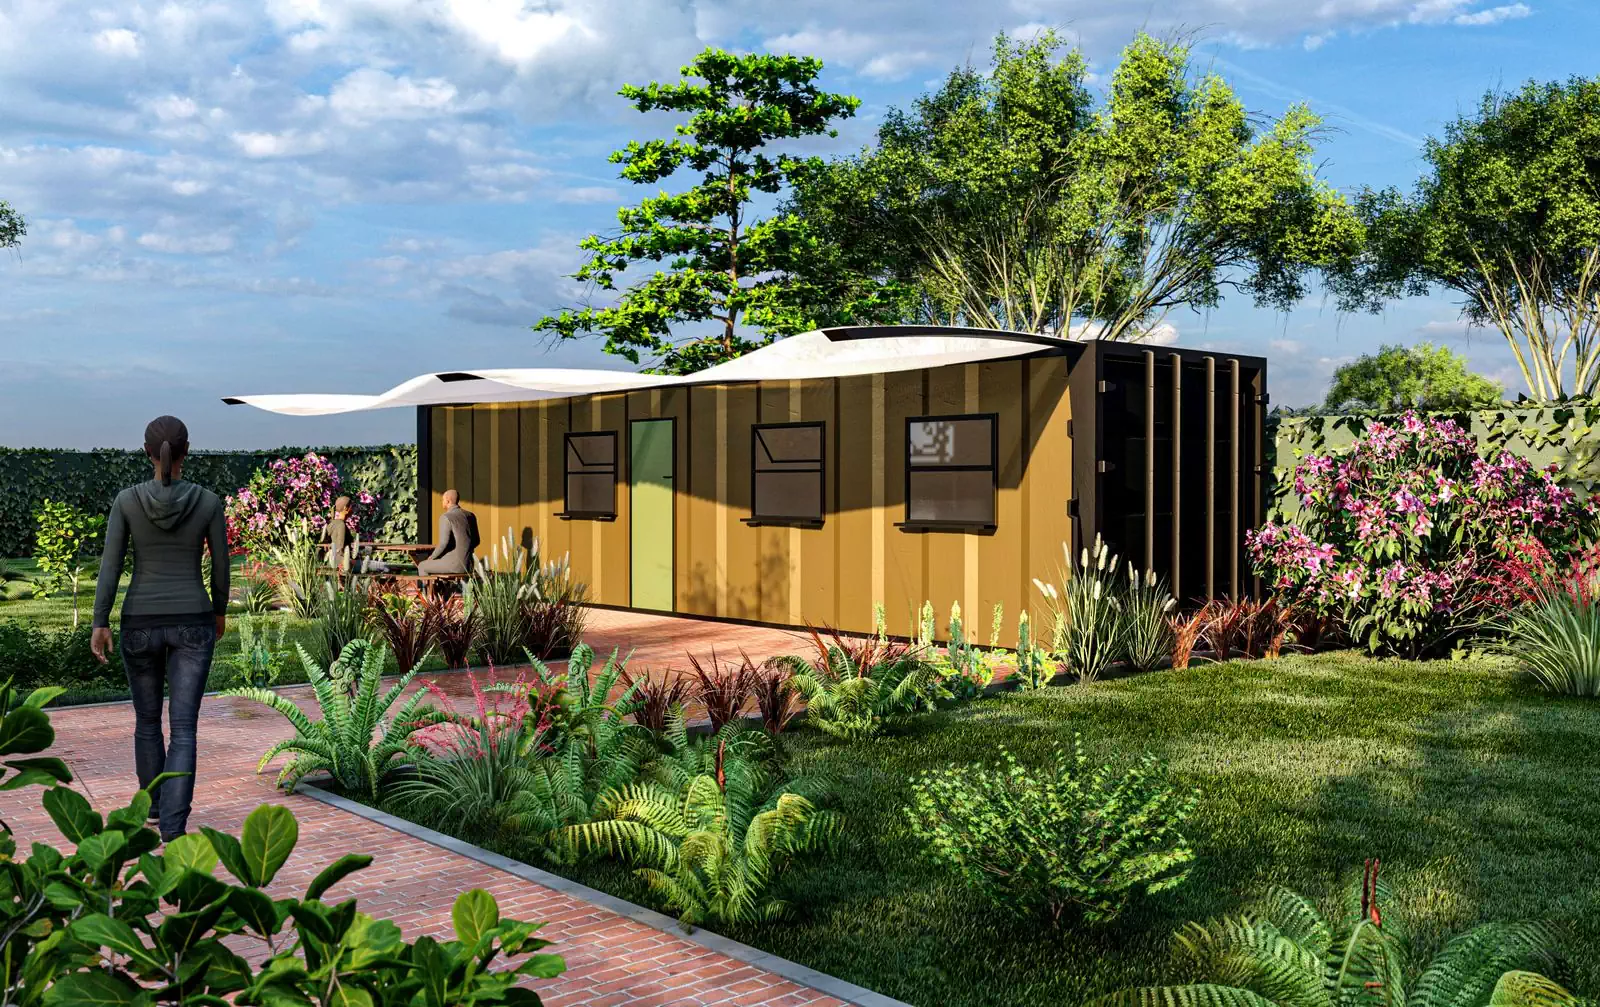 emporary school design out of containers in Harare by Pantic architects